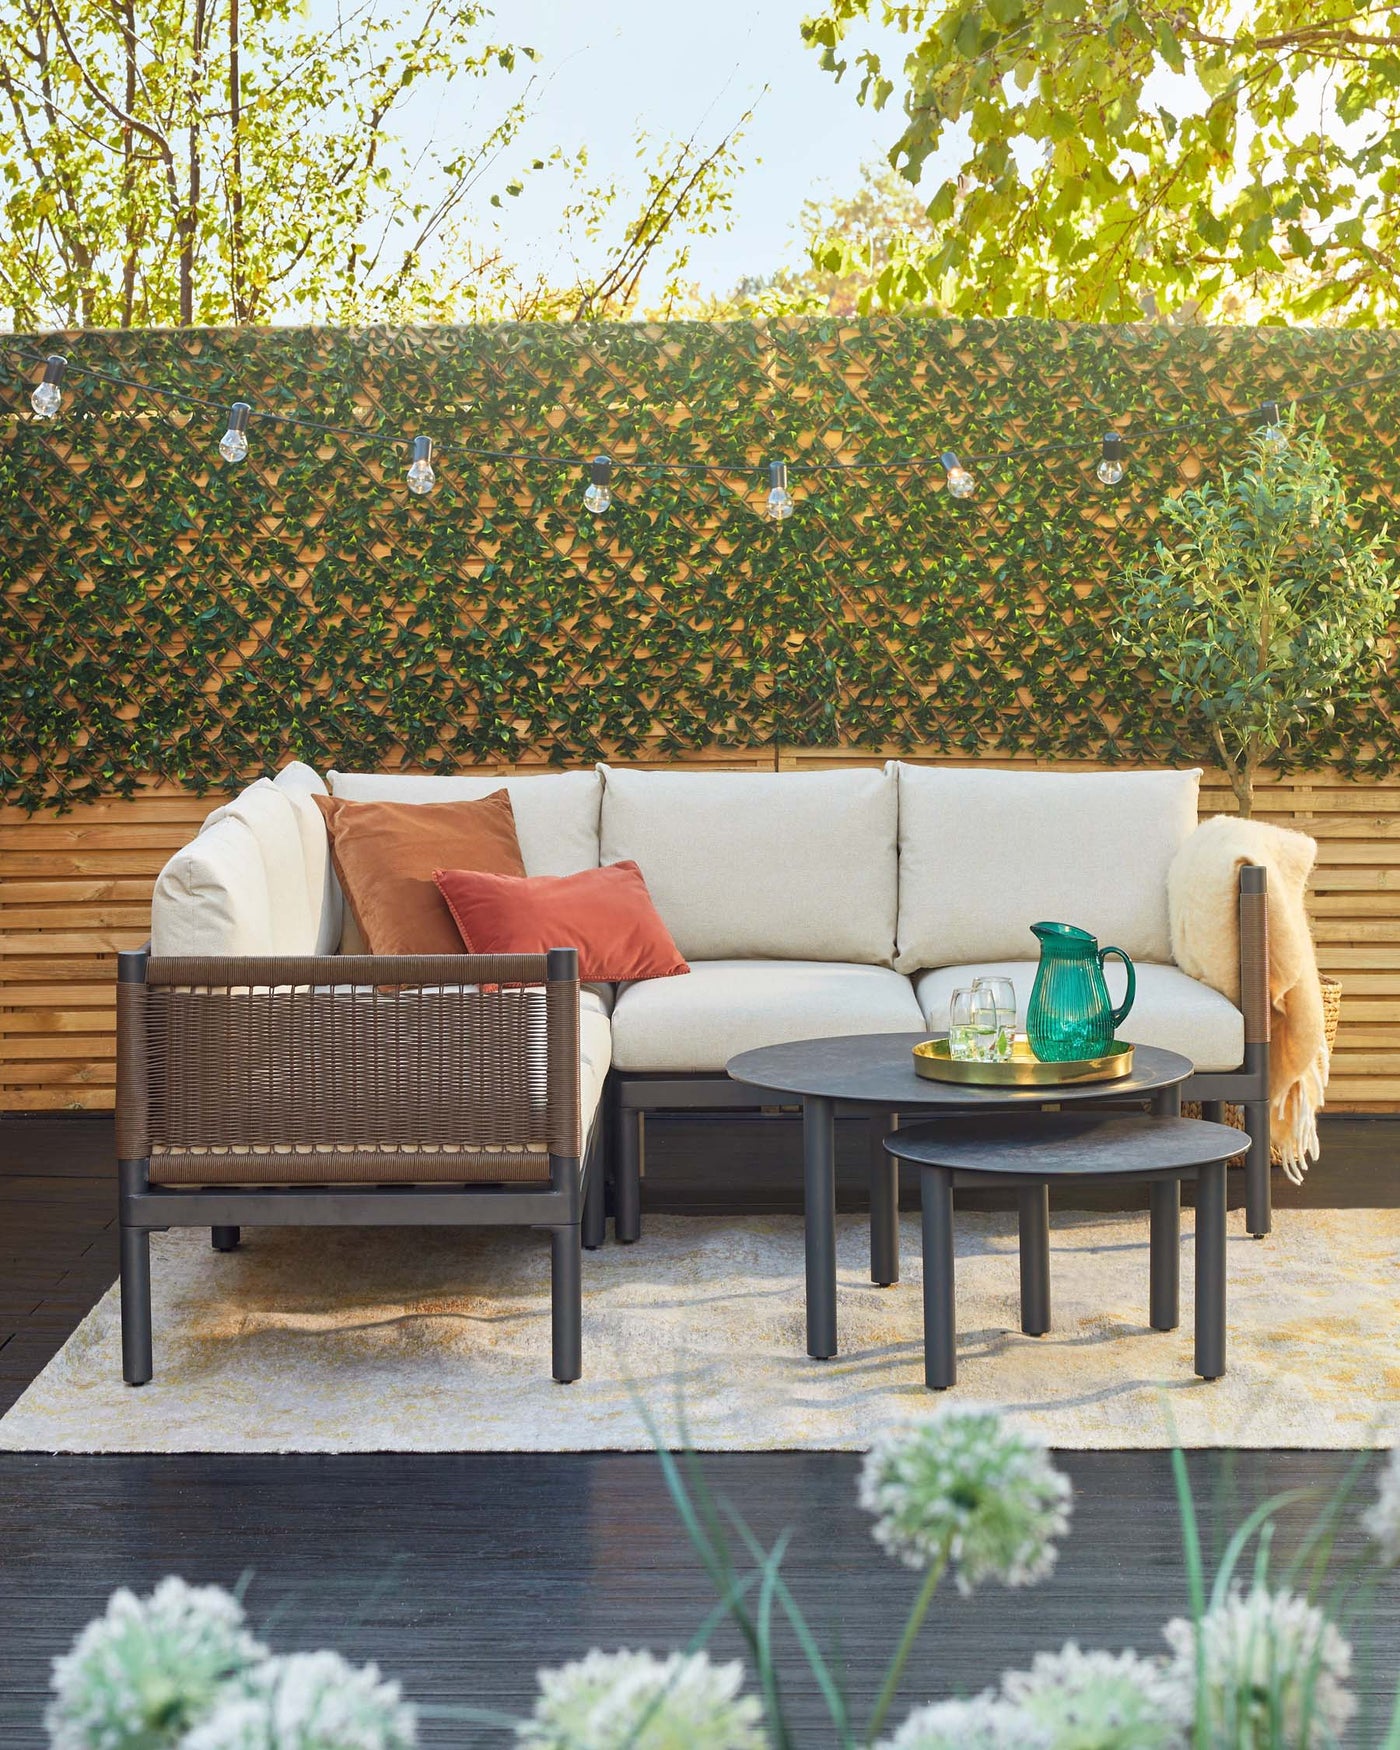 Modern outdoor furniture set including a beige cushioned corner sectional sofa with accent pillows, a matching armchair with wicker back, and two round nested coffee tables in black finish on a patterned area rug.